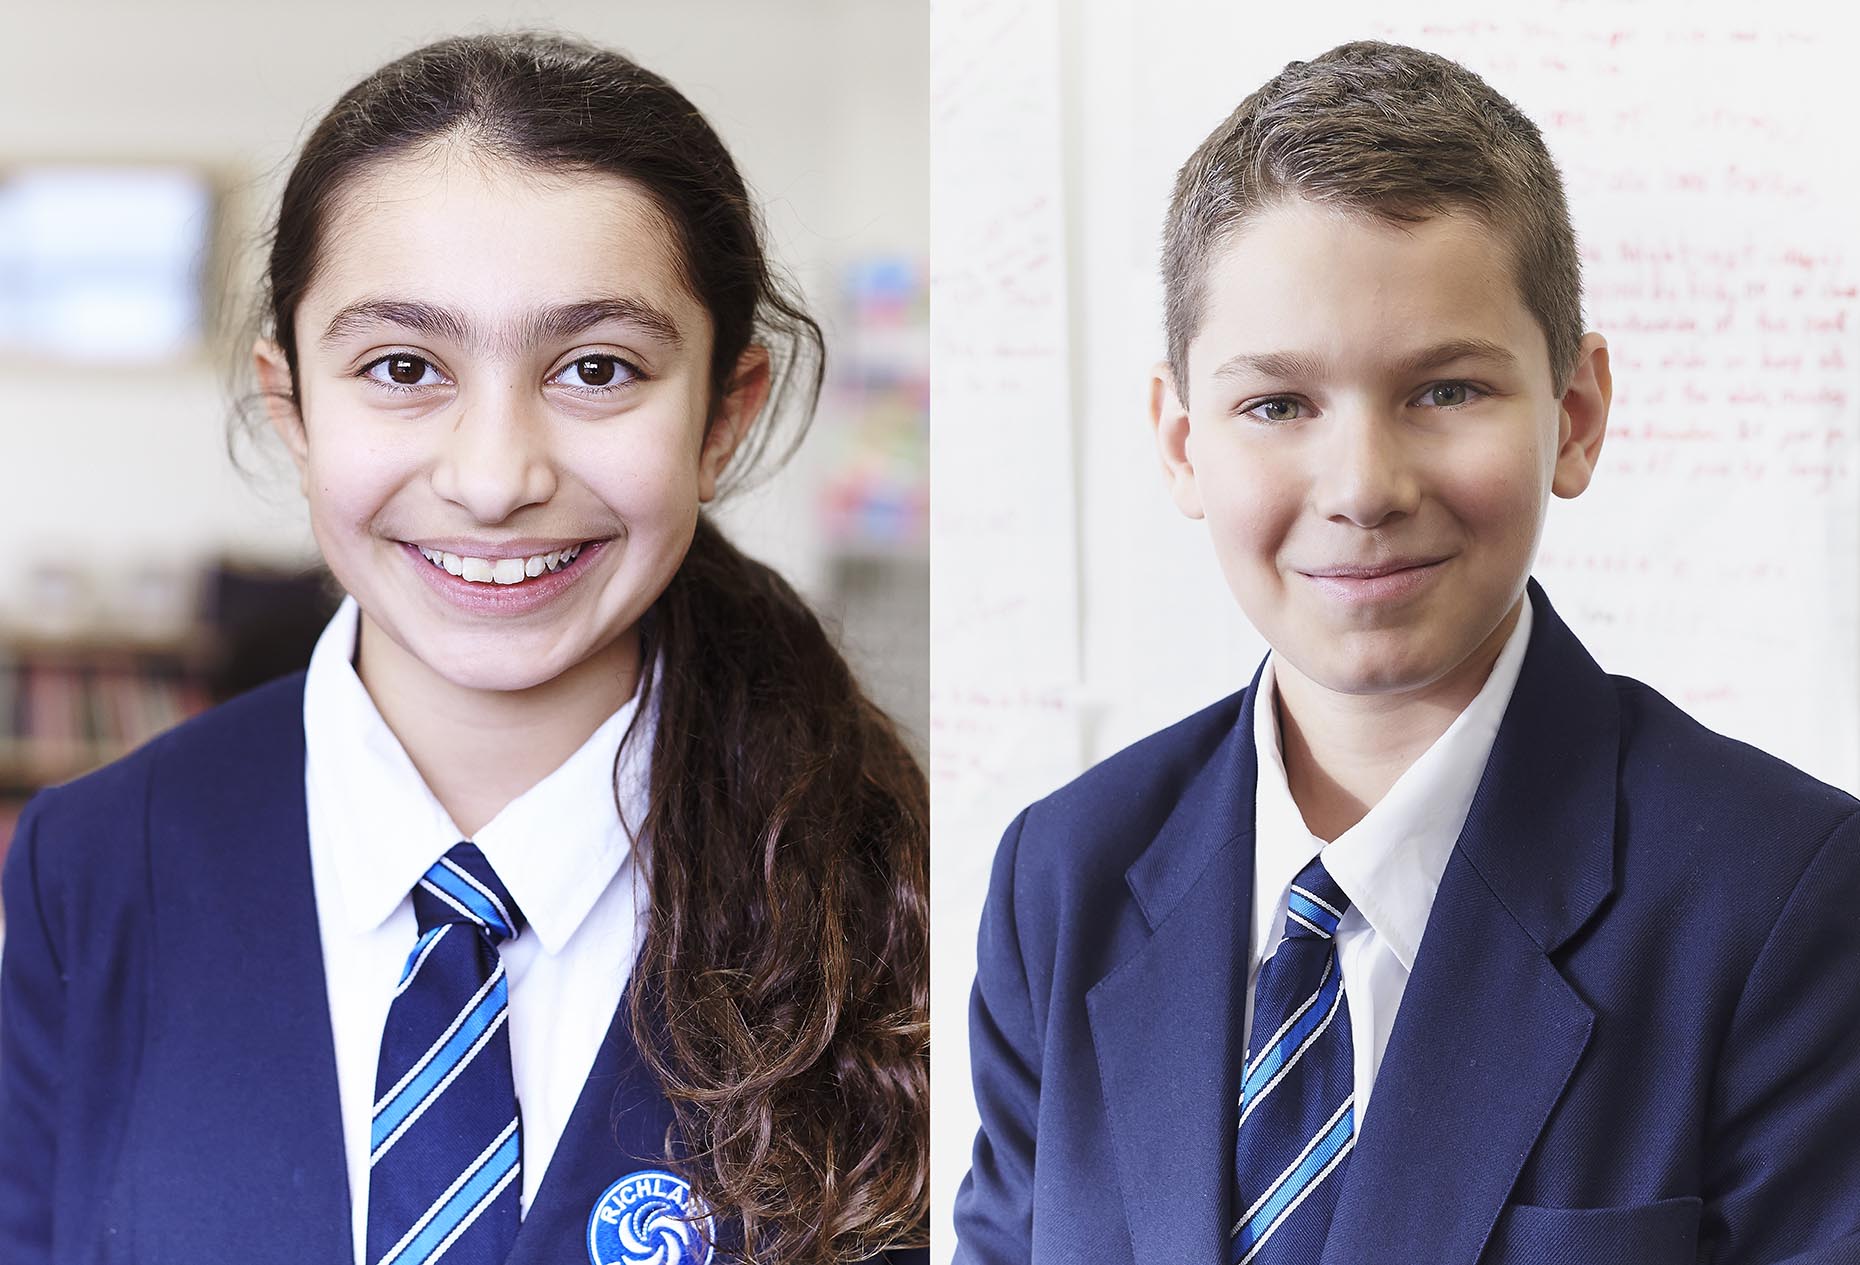 Portraits of smiling students